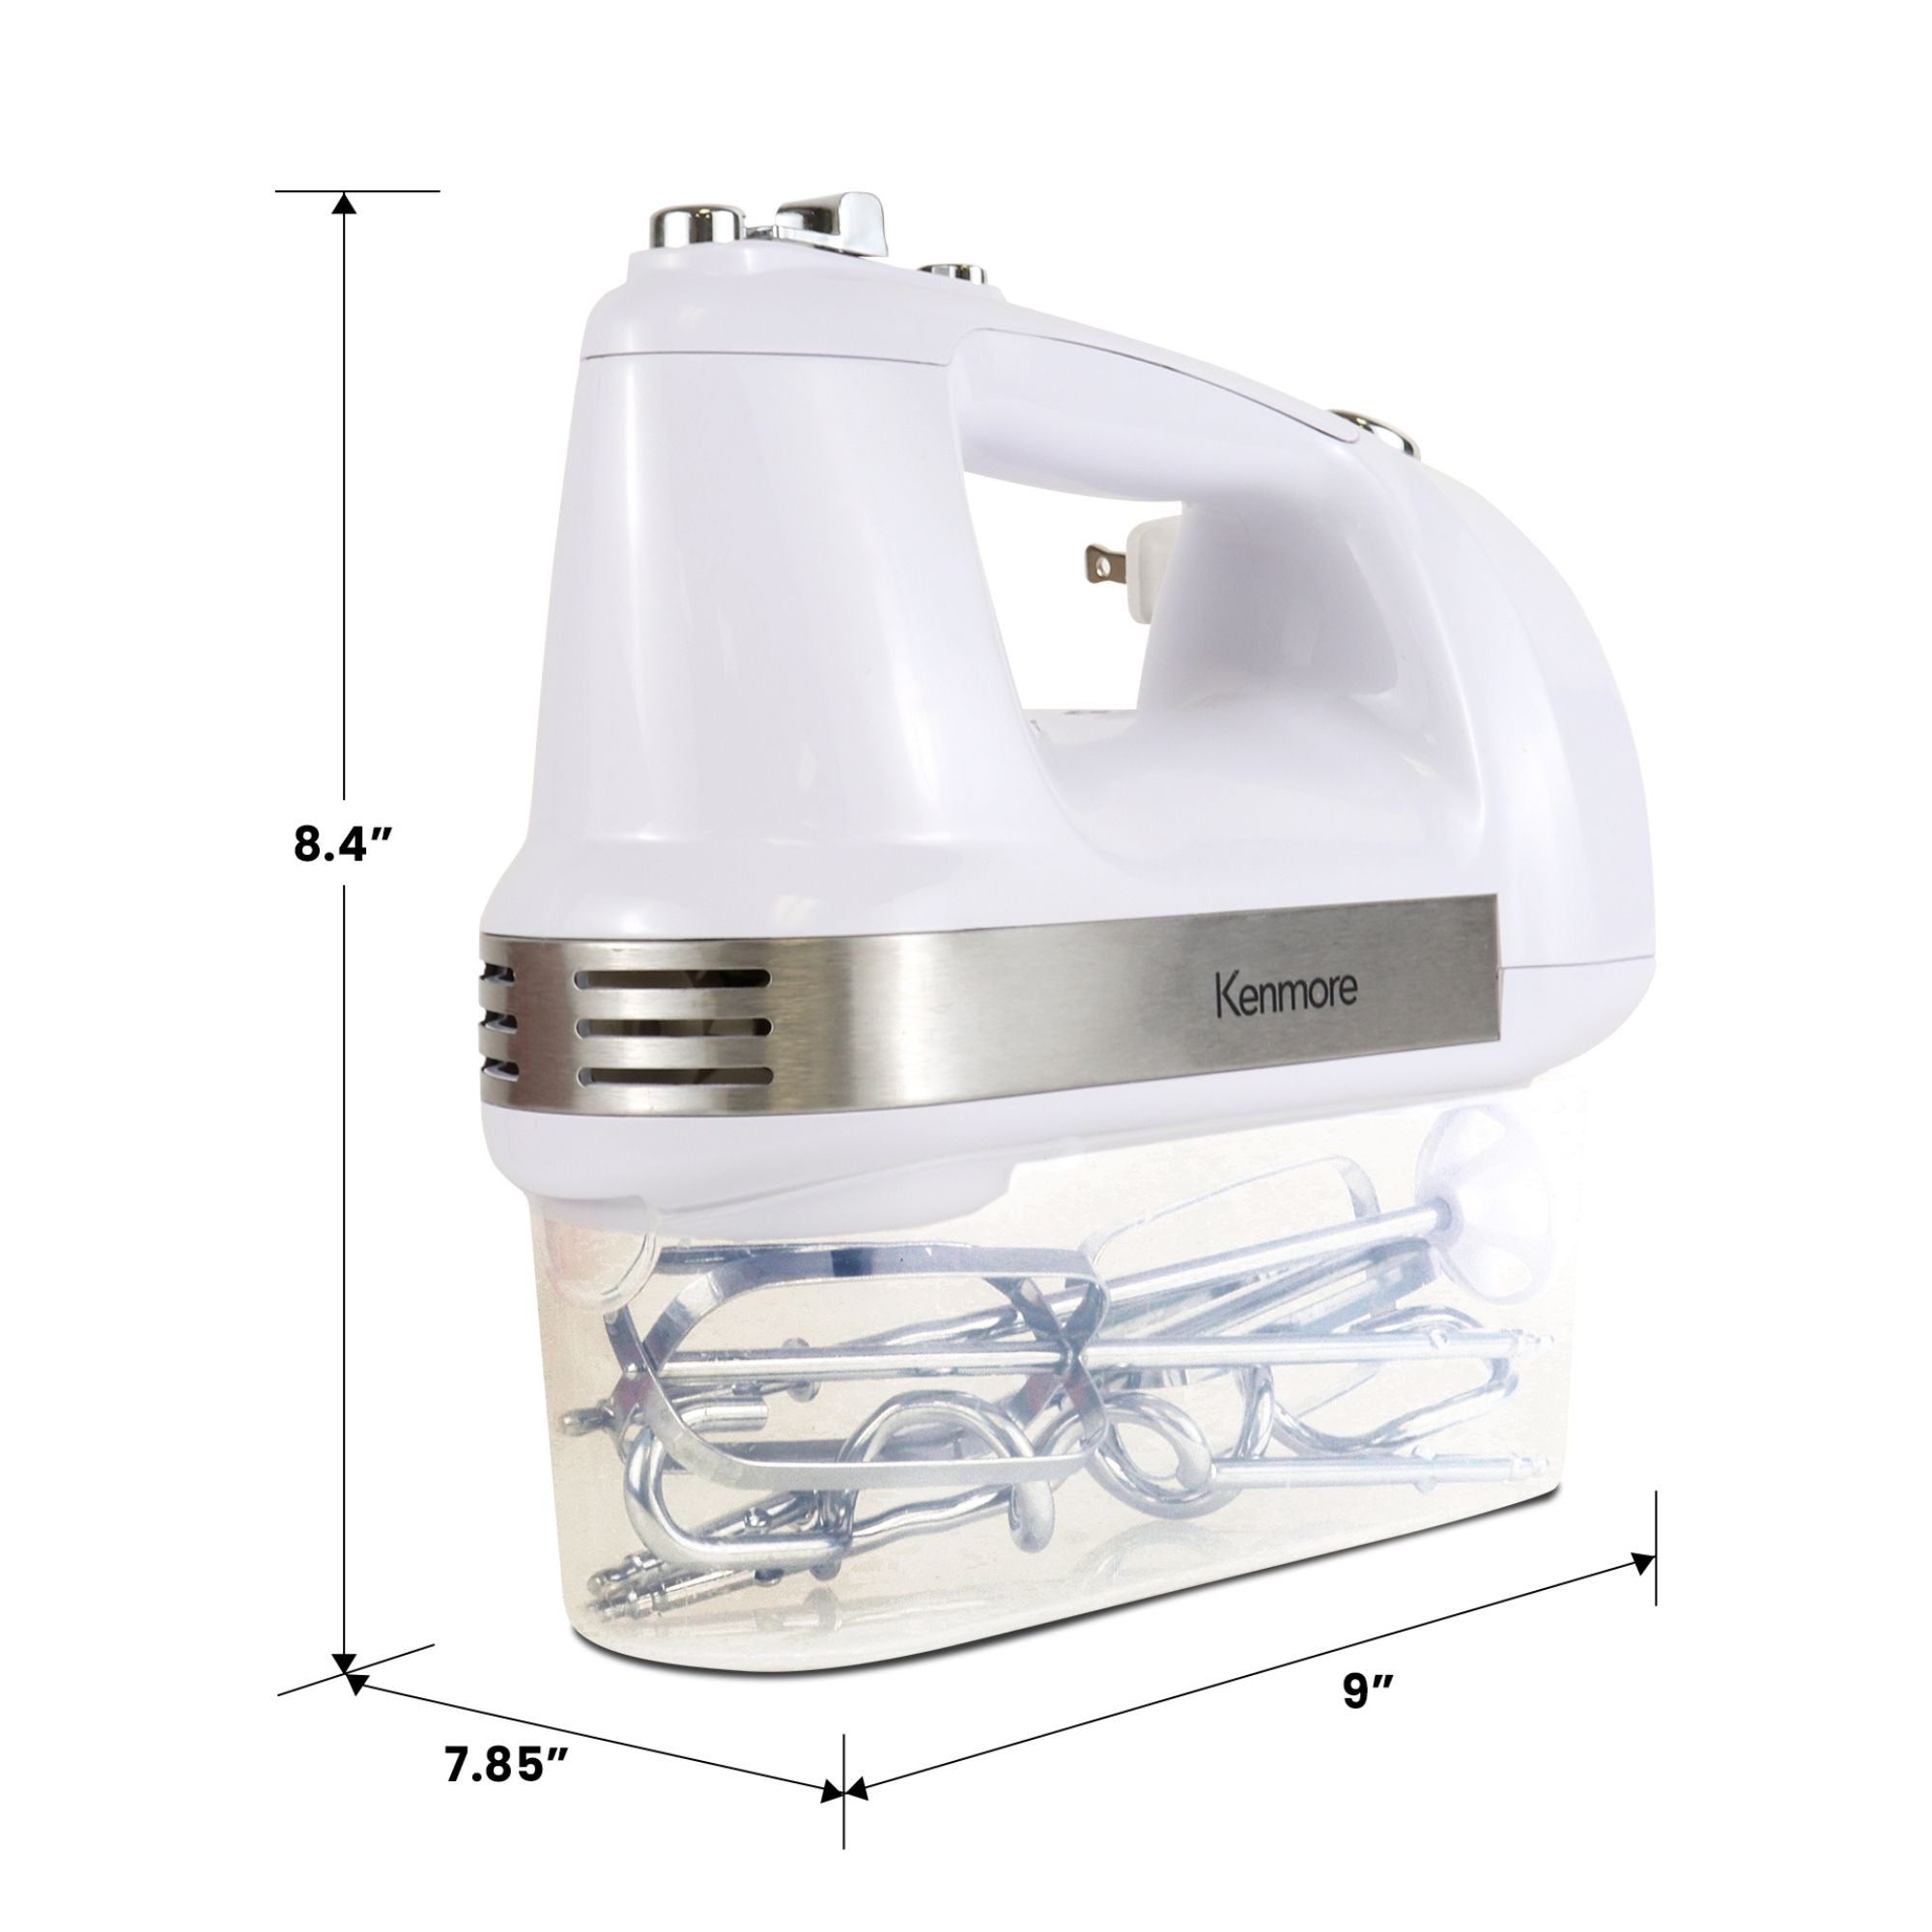 Kenmore 5 speed hand mixer on a white background with dimensions labeled